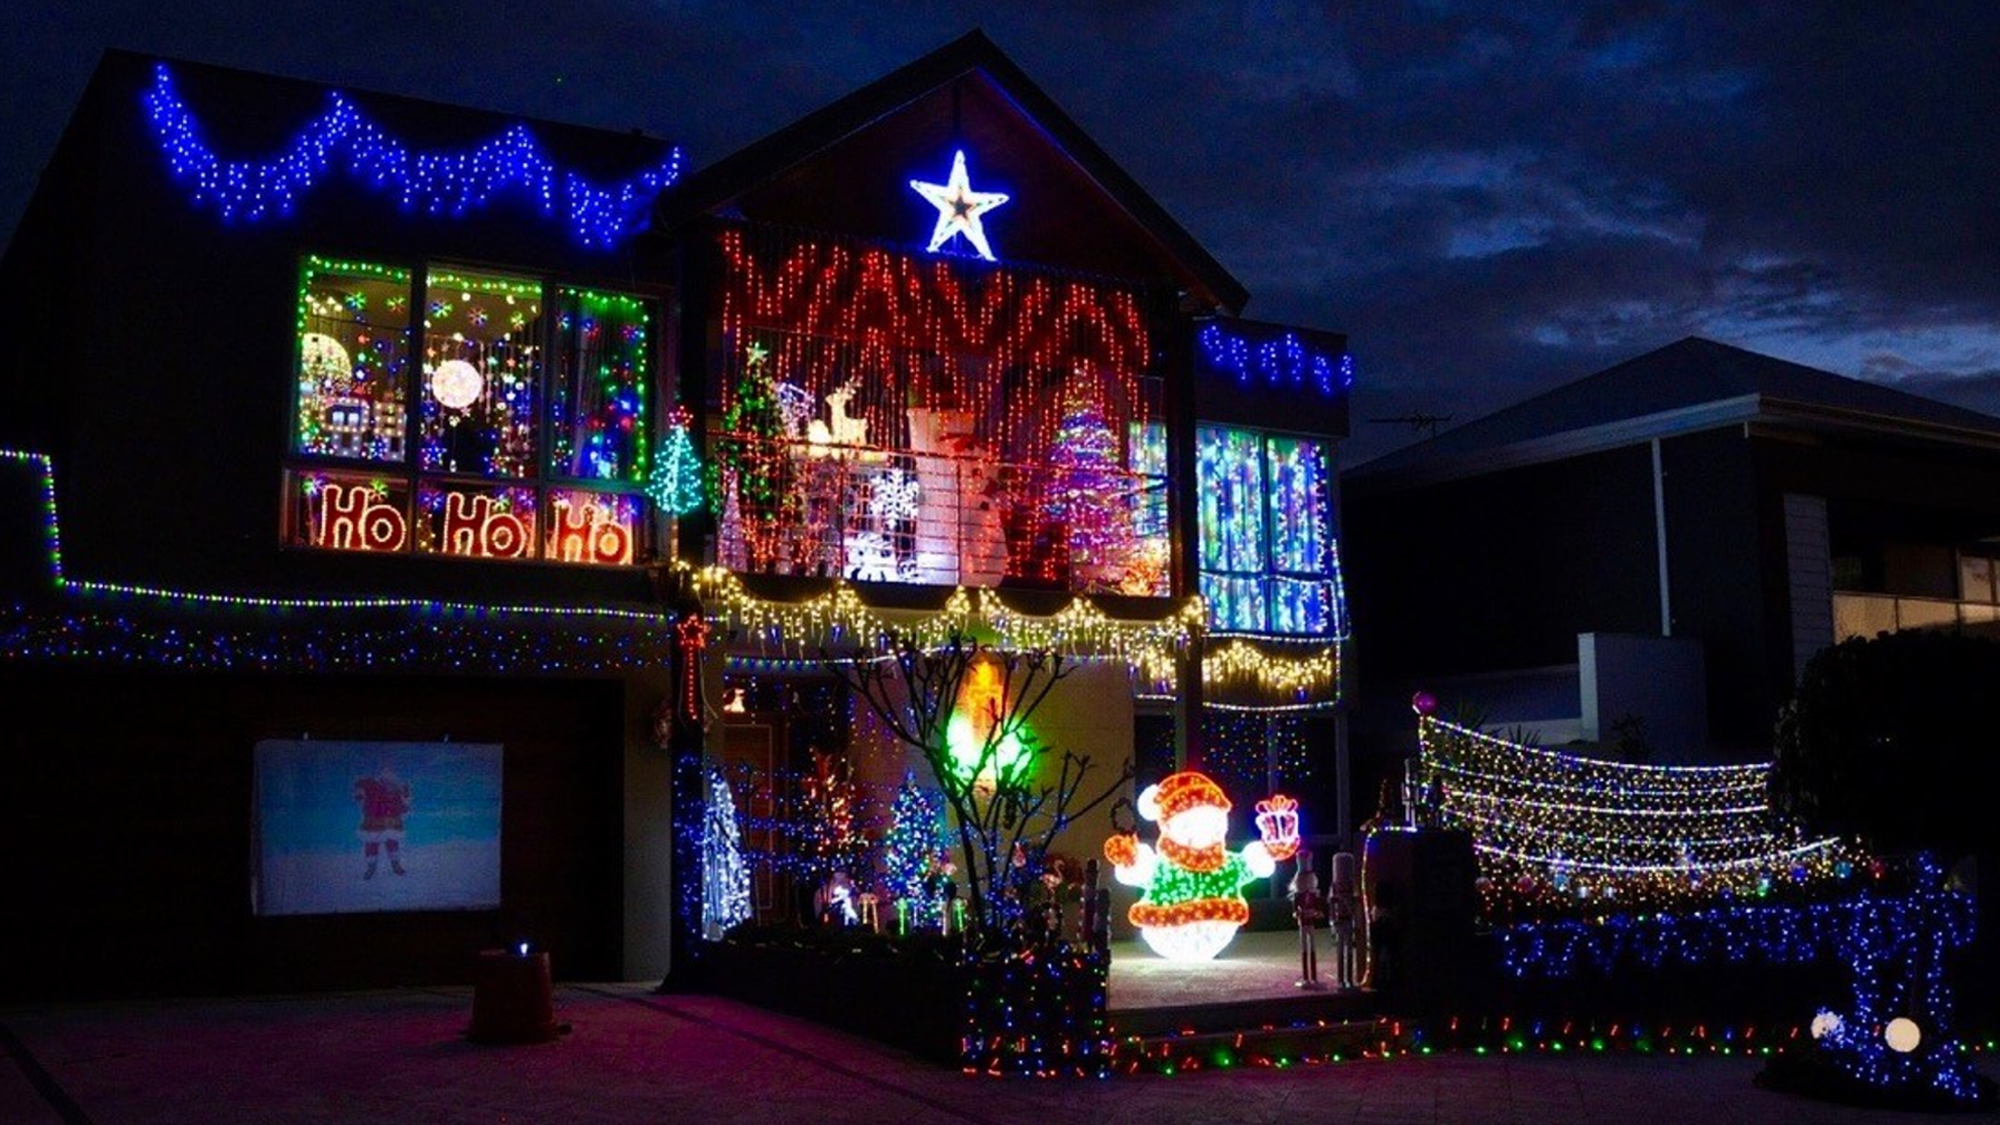 Competition - Festival of Lights finalist